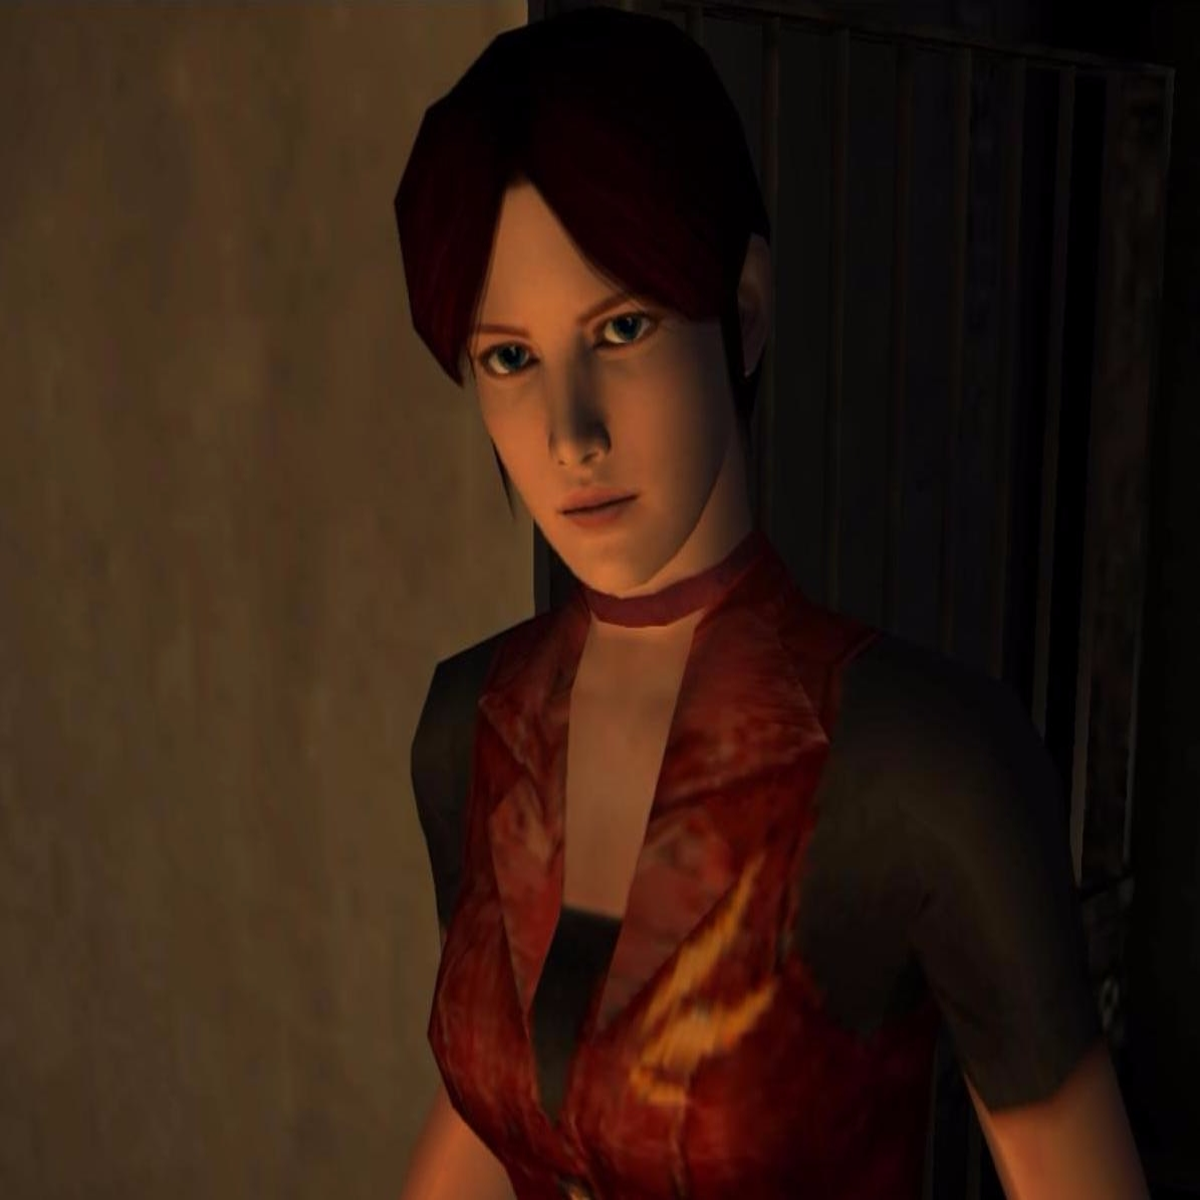 Disaster Year: 20XX: Resident Evil Code: Veronica X